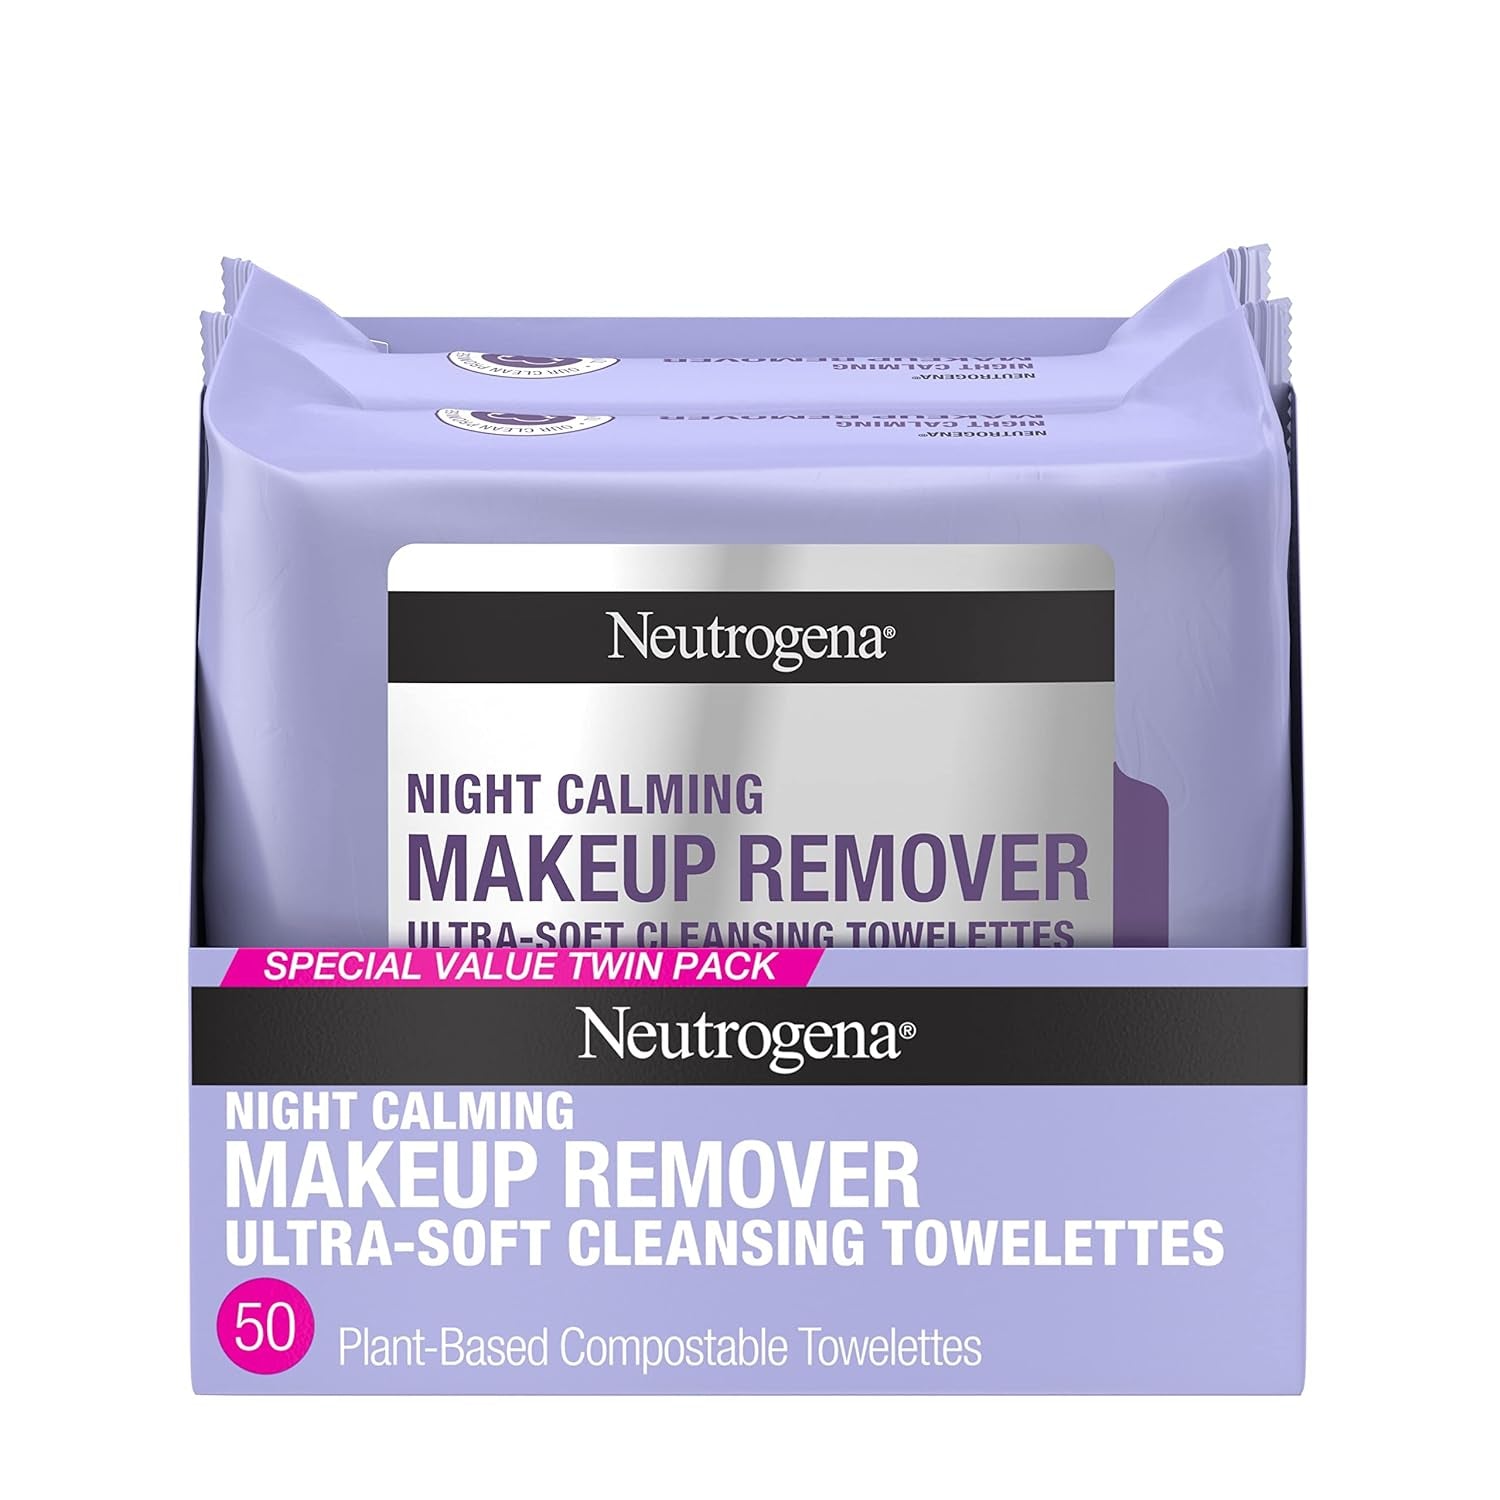 Makeup Remover Night Calming Cleansing Towelettes, Disposable Nighttime Face Wipes to Remove Dirt, Oil & Makeup, 25 Ct, Twin Pack